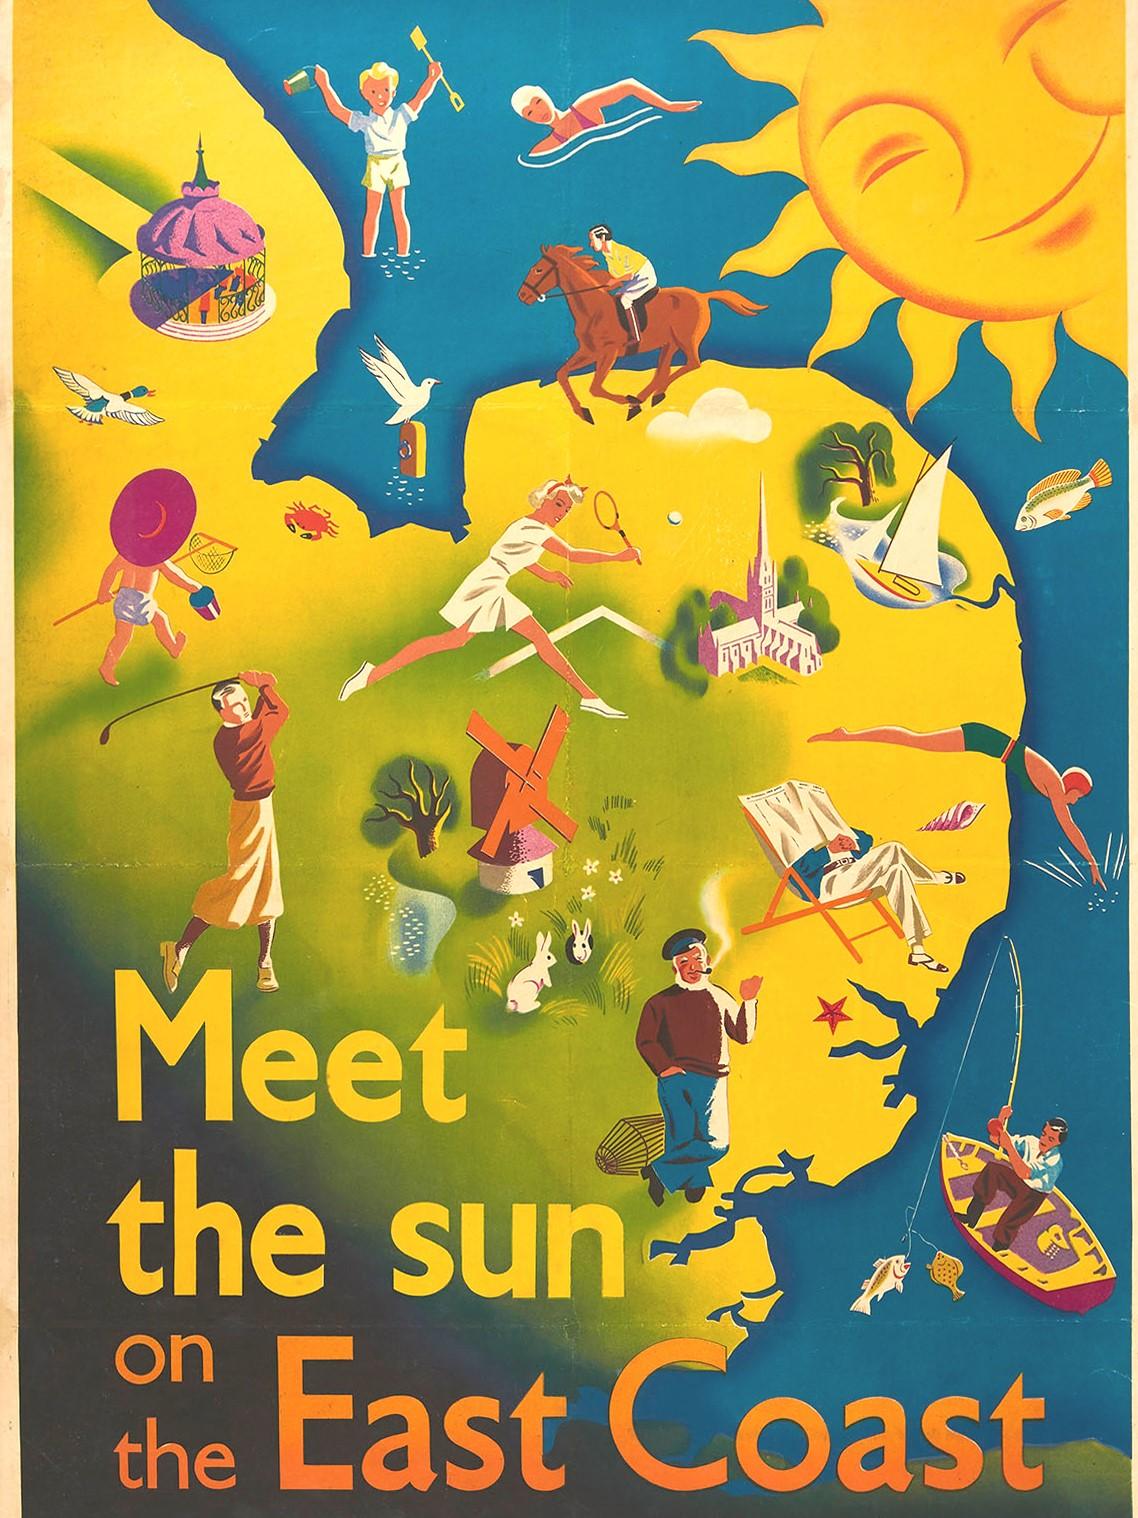  Original vintage LNER travel poster issued by the London and North Eastern Railway, meet the sun on the east coast it's quicker by Rail England's Drier Side, featuring a colorful summer holiday design showing a smiling sun shining down over a map